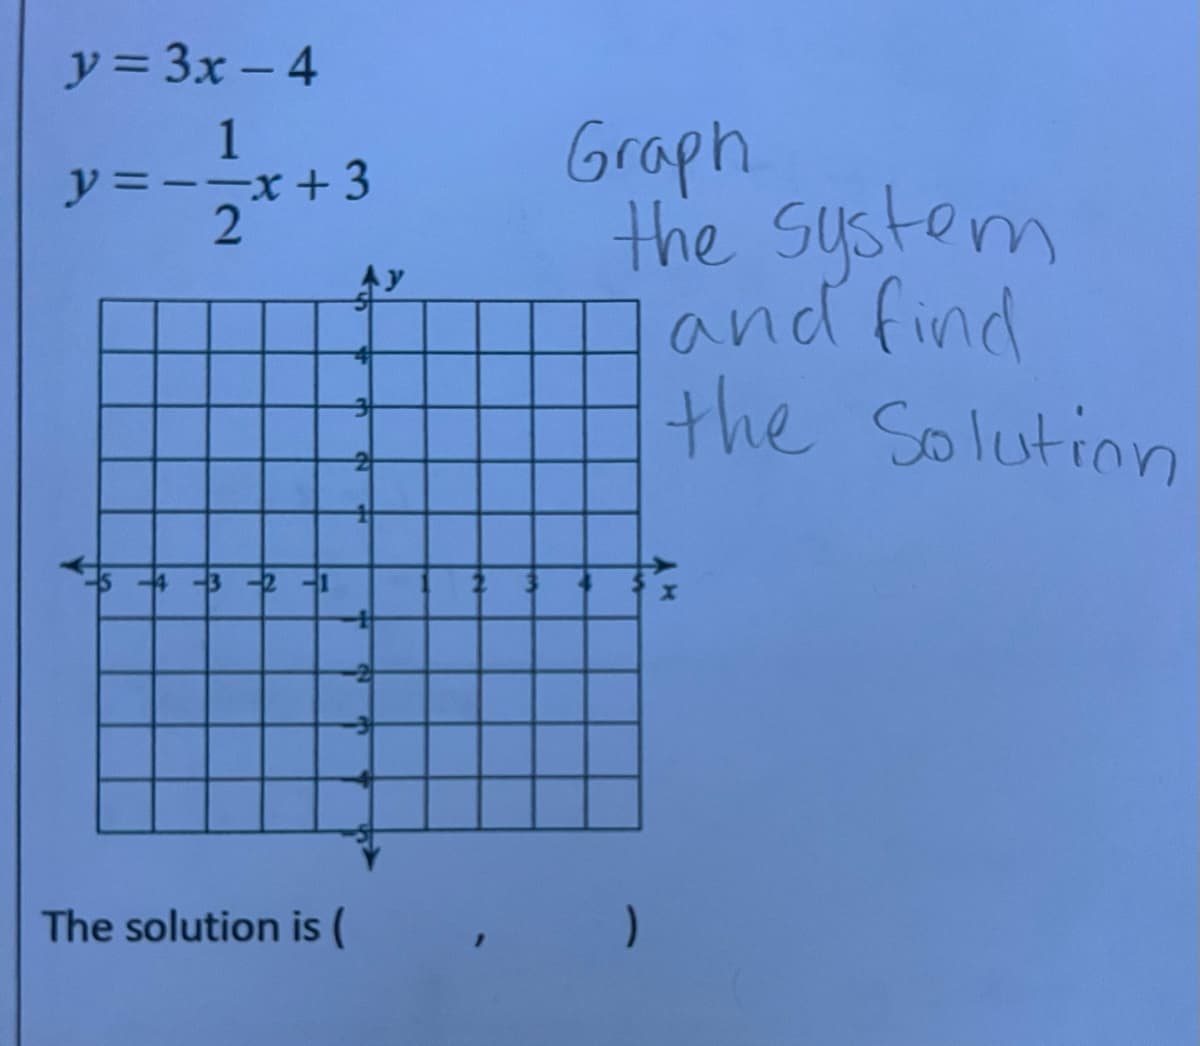 y = 3x – 4
Graph
the system
and find
the Solutinn
1
=--x+3
y
The solution is (
